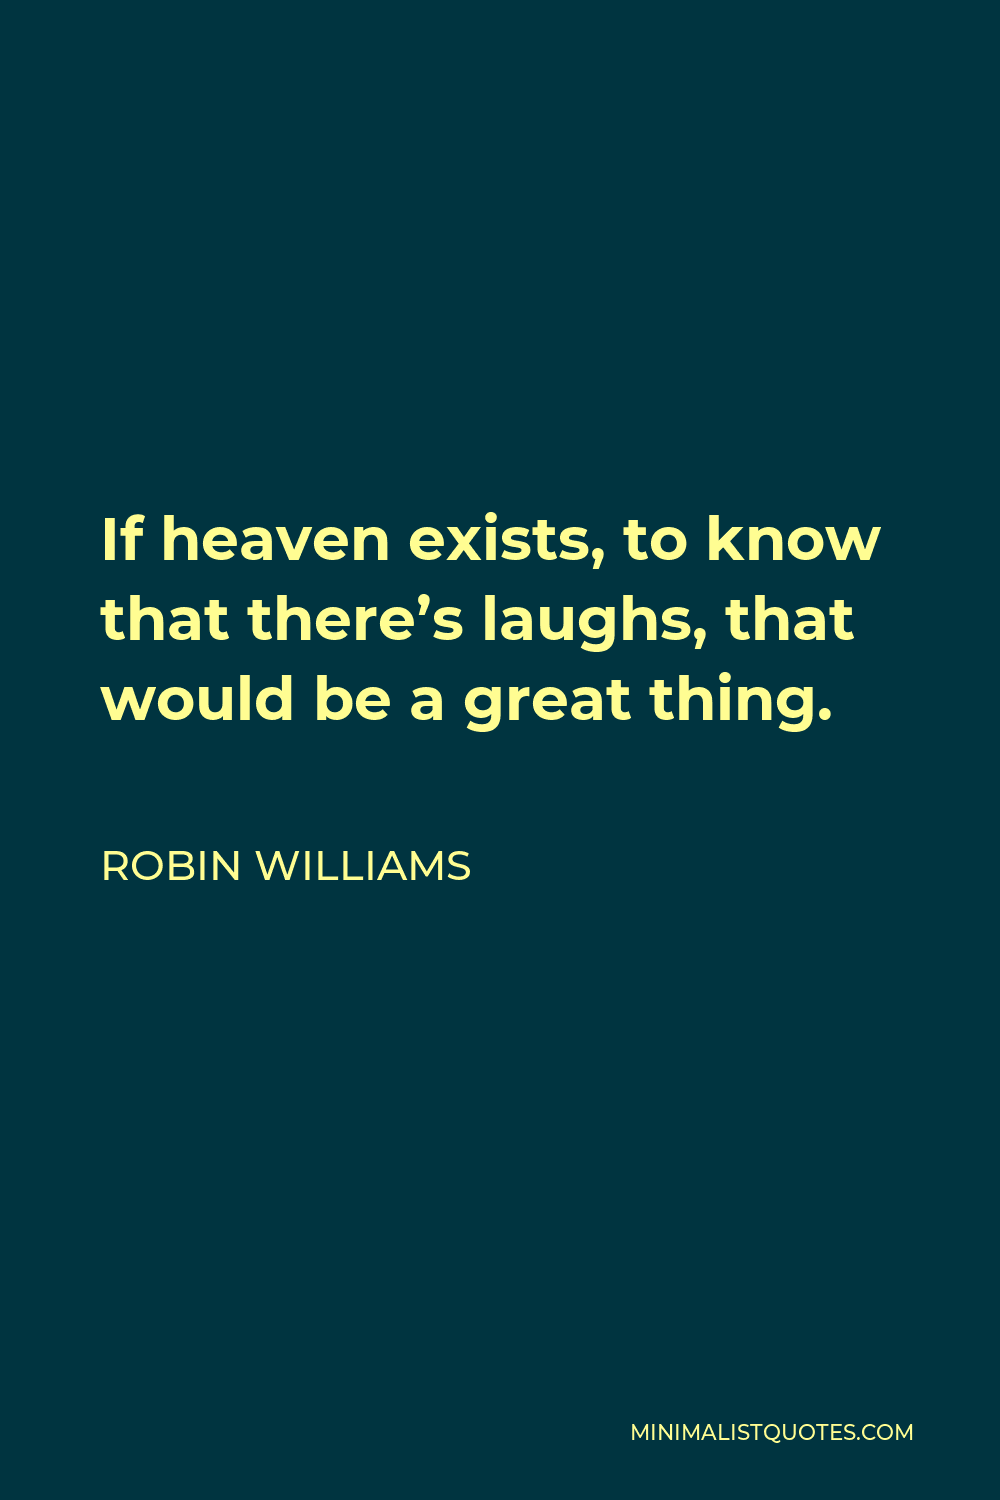 Robin Williams Quote - If heaven exists, to know that there’s laughs, that would be a great thing.